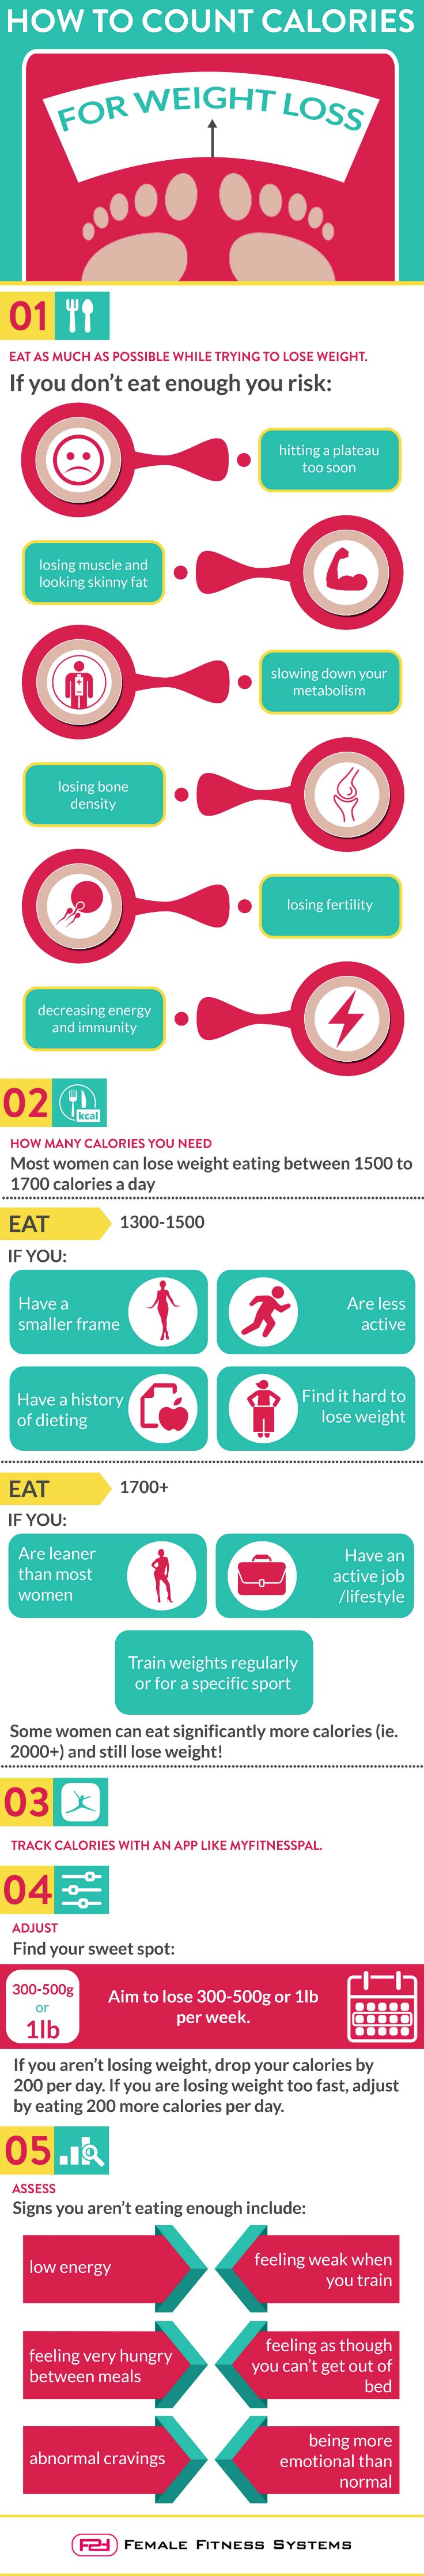 an infographic showing the steps to setting and adjusting caloric intake for weight loss